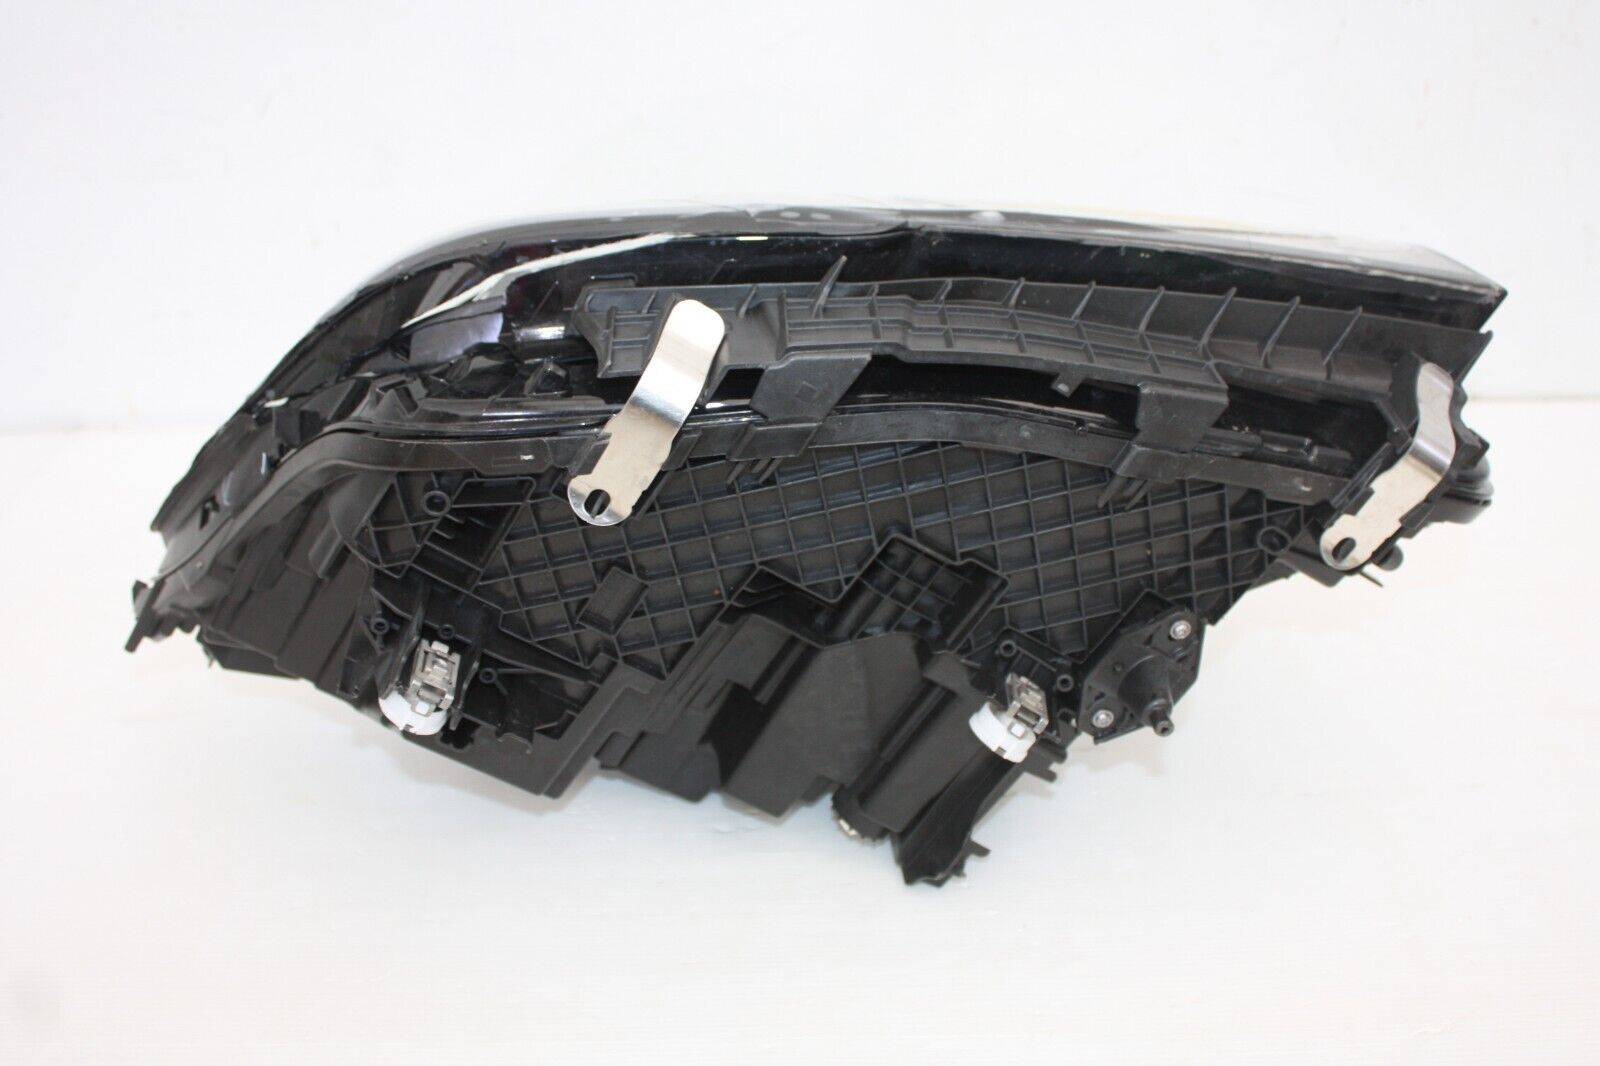 BMW-X5-X6-G05-G06-Right-Side-LED-Headlight-5A388C6-02-SEE-PICS-AS-ITS-DAMAGED-175444559307-5